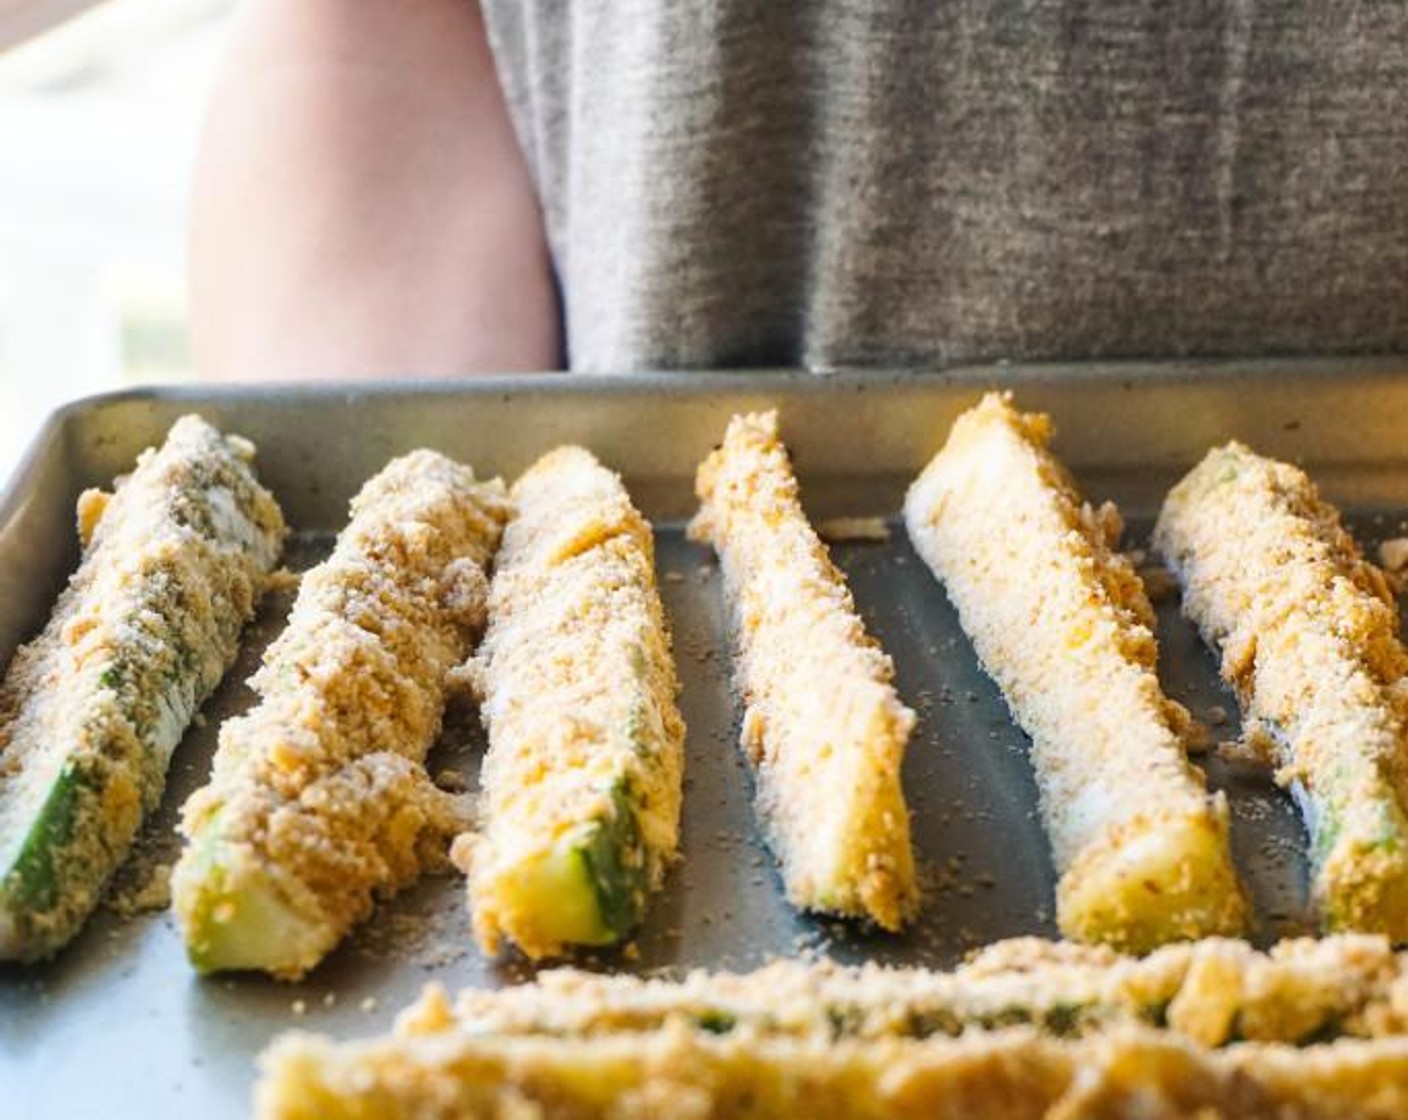 step 5 Dip the zucchini fries in the order mentioned above and transfer to a baking sheet. Repeat until all fries are coated.